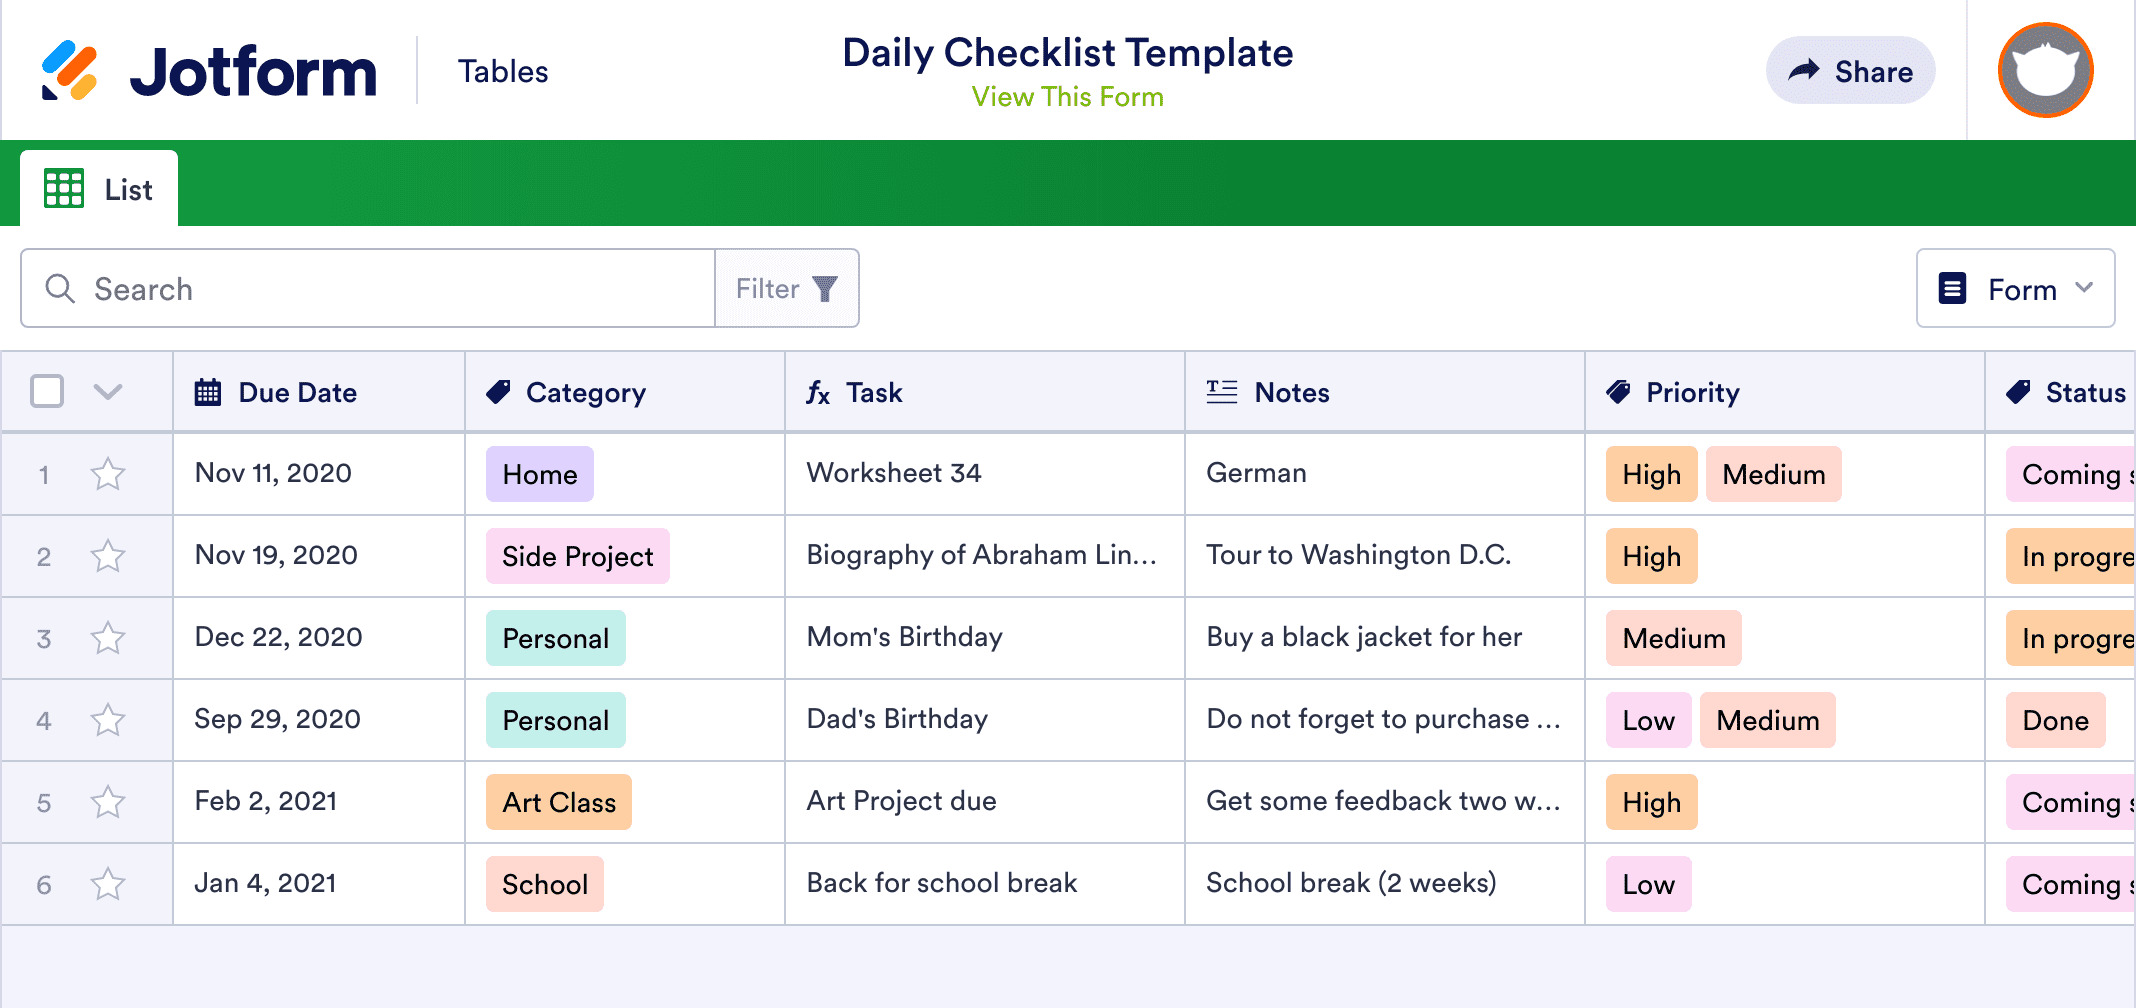 Daily Checklist Template | Jotform Tables